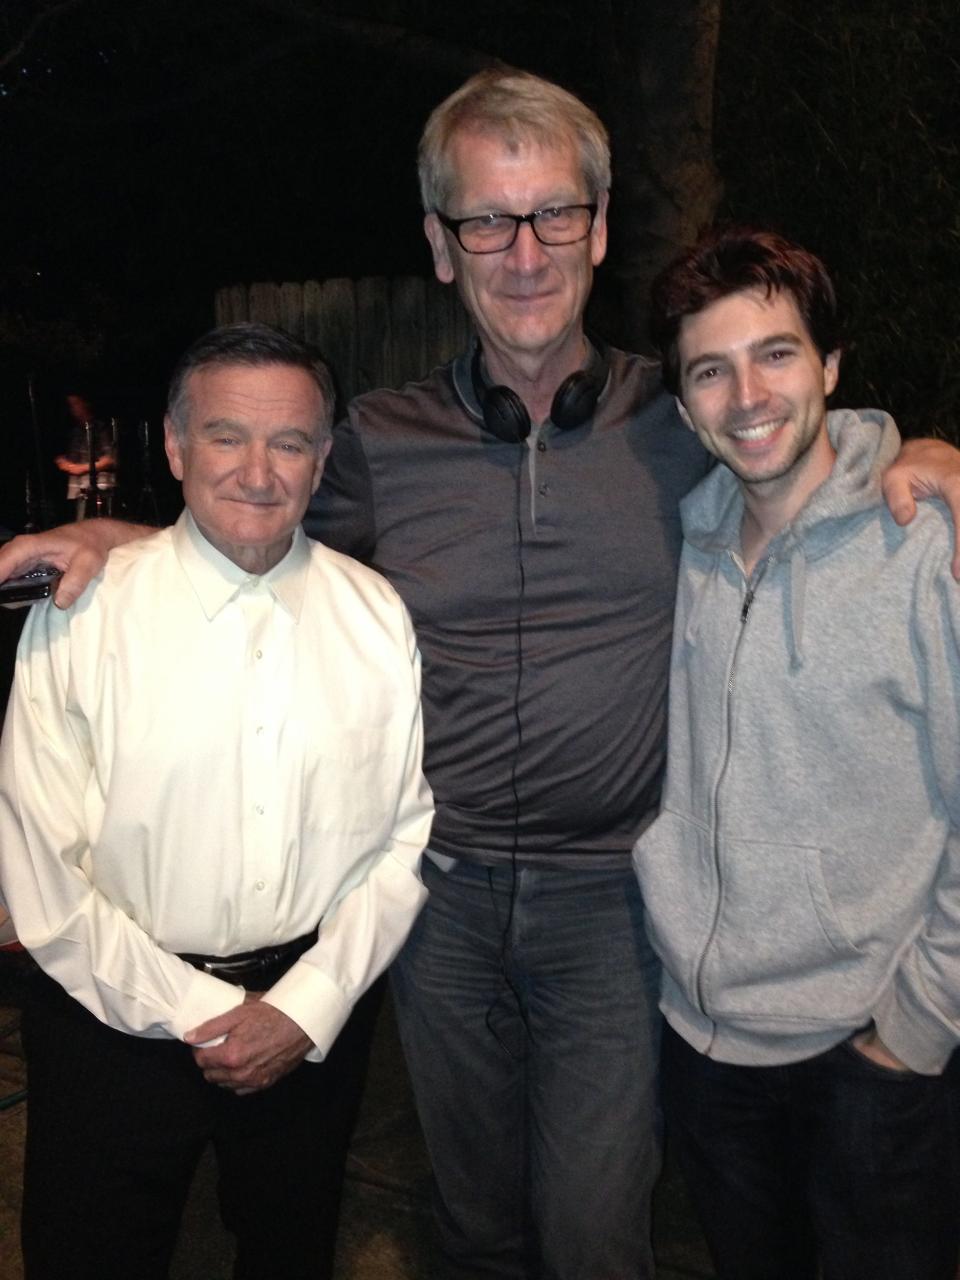 Douglas Soesbe poses with "Boulevard" actors Robin Williams and Roberto Aguire.